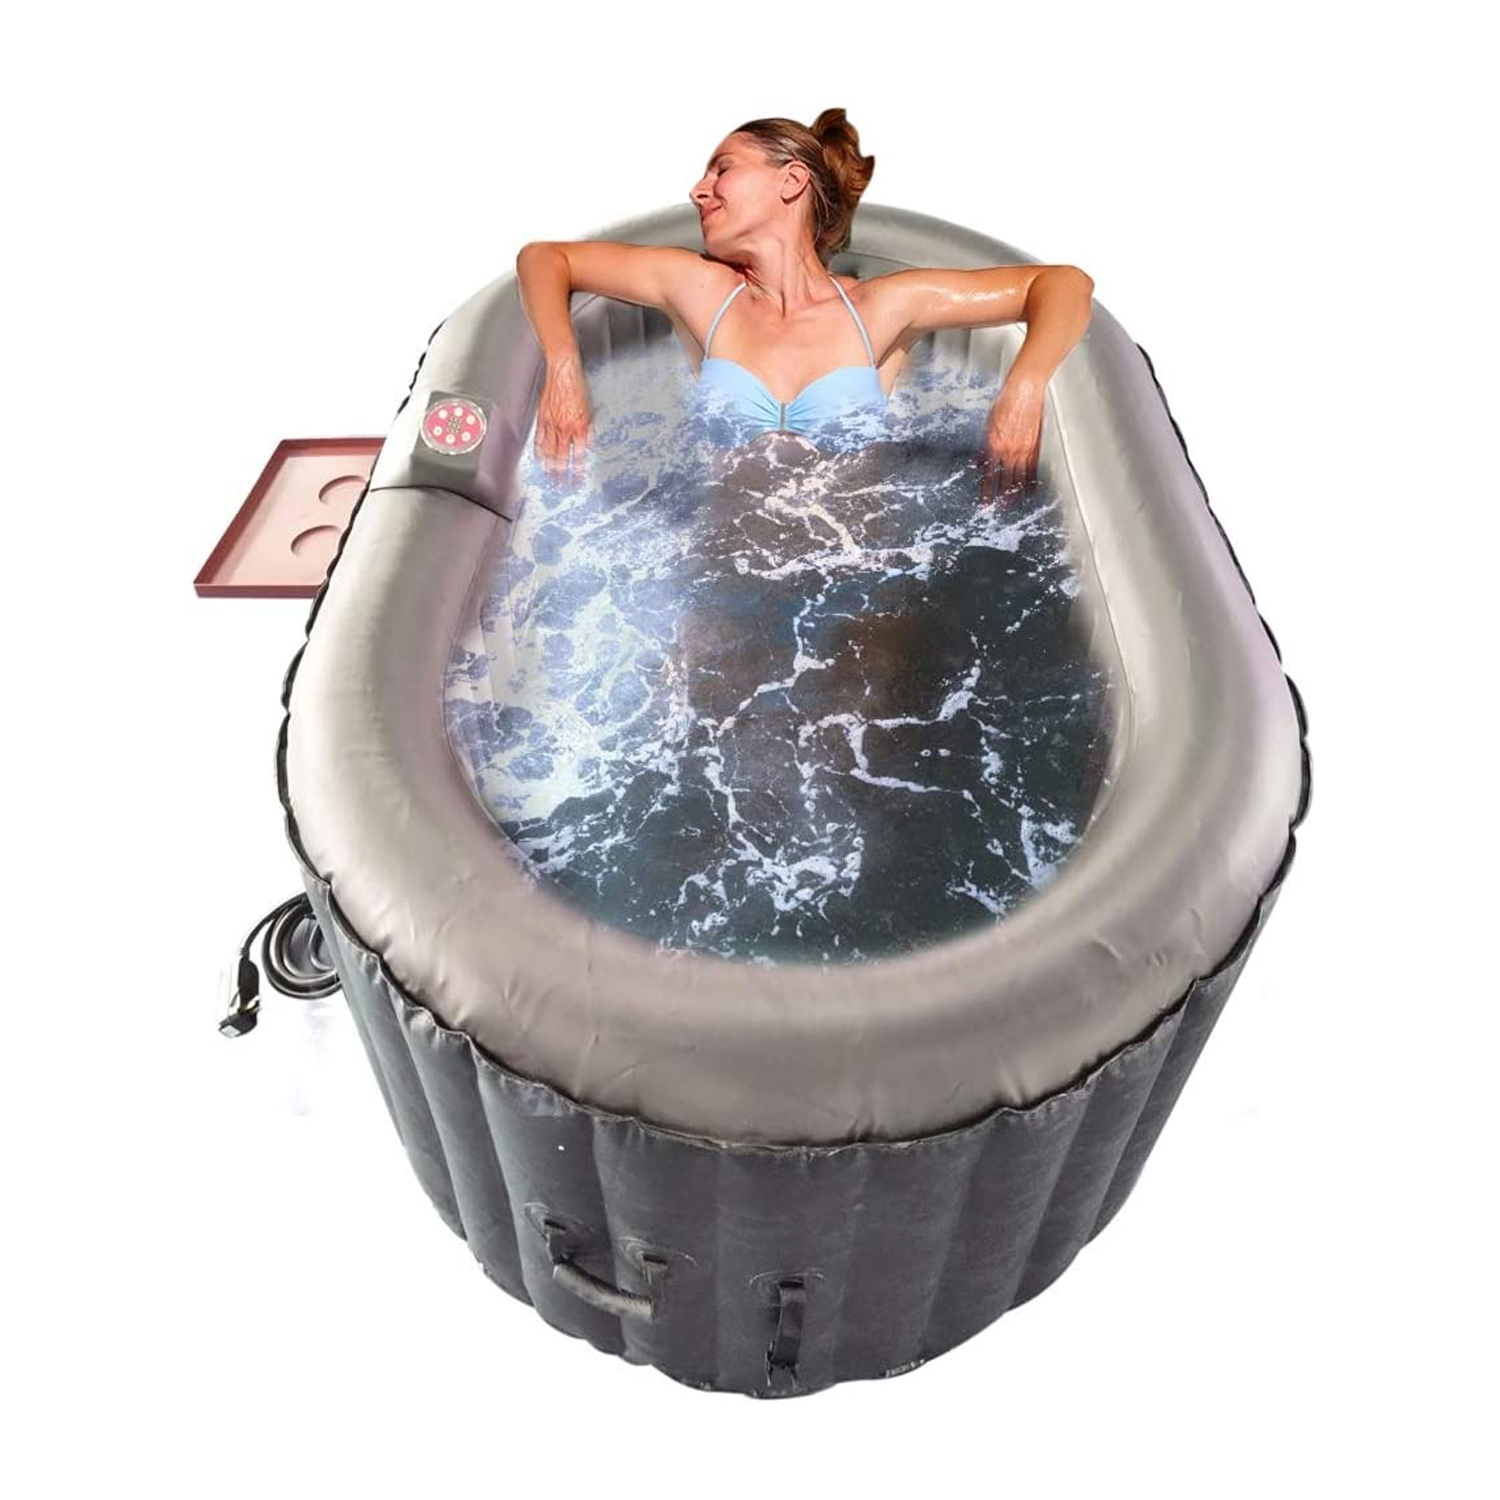 Aleko 2 Person Oval Inflatable Jetted Hot Tub w/ Fitted Cover, Black